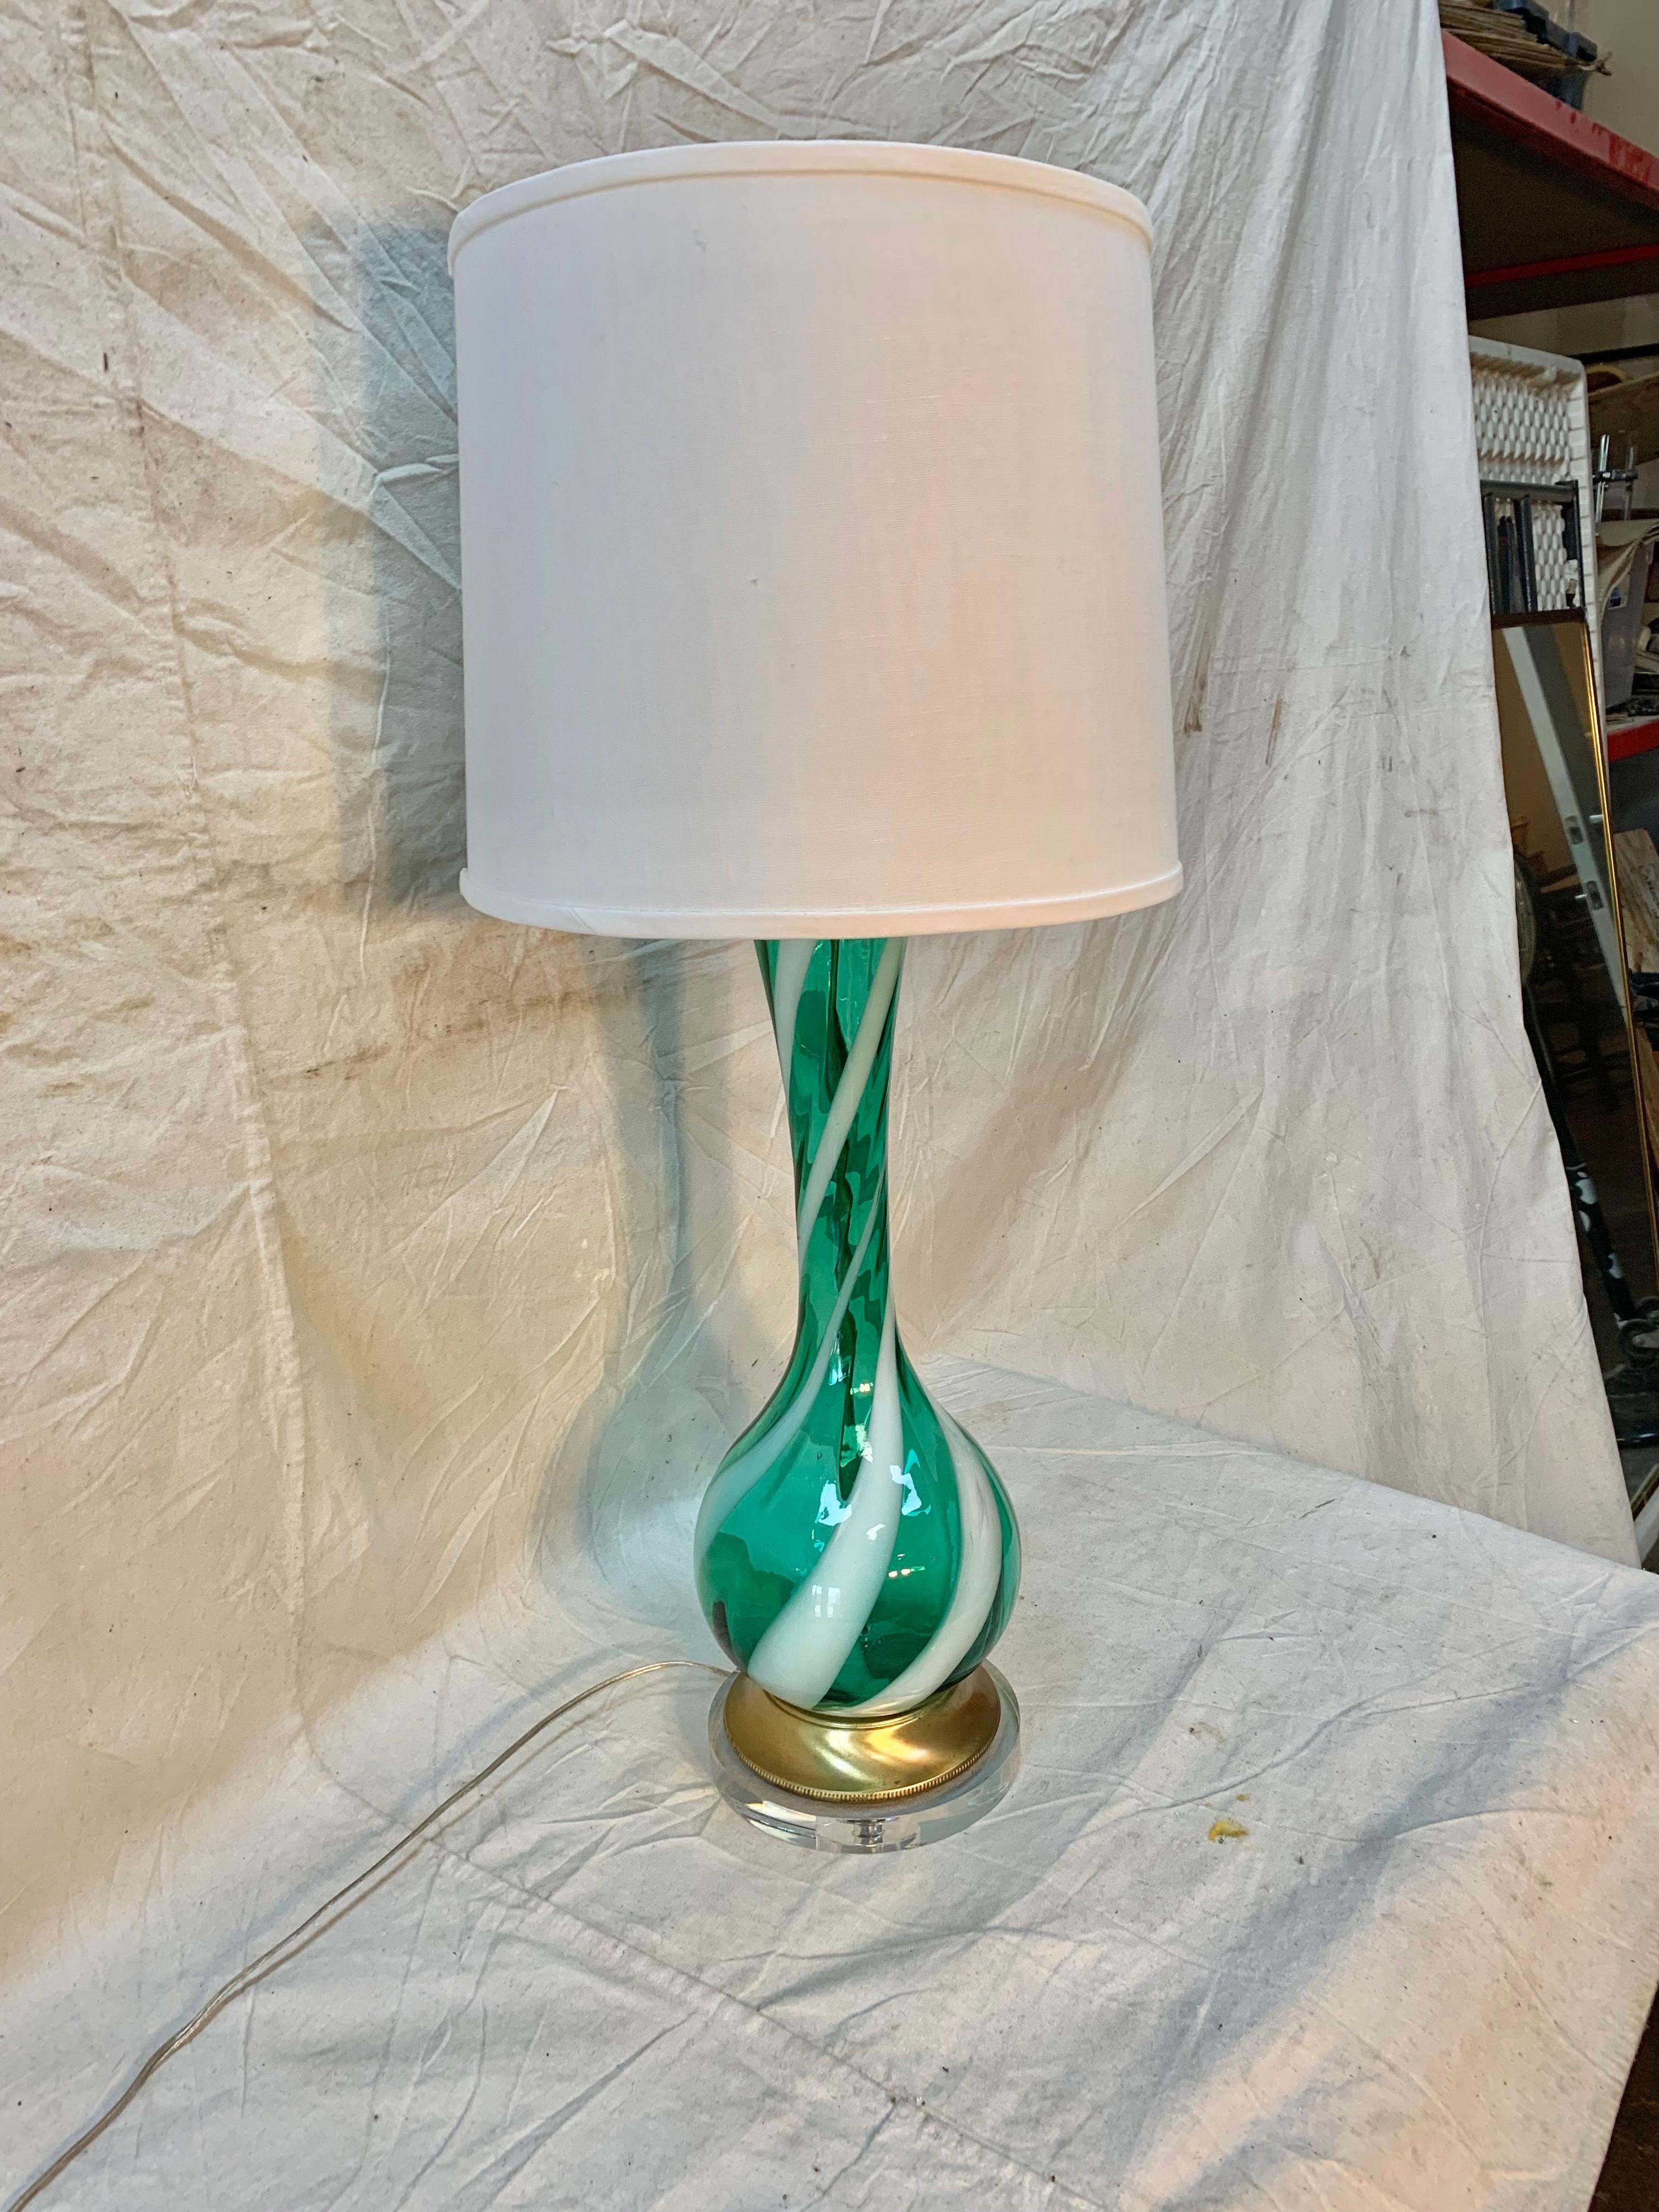 Amazing vintage 1960s Murano glass table lamp. The lamp features green and white swirl color glass with the original brass base. This lamp has been professionally rewired to USA standards with the addition of a lucite base and fitted with a new